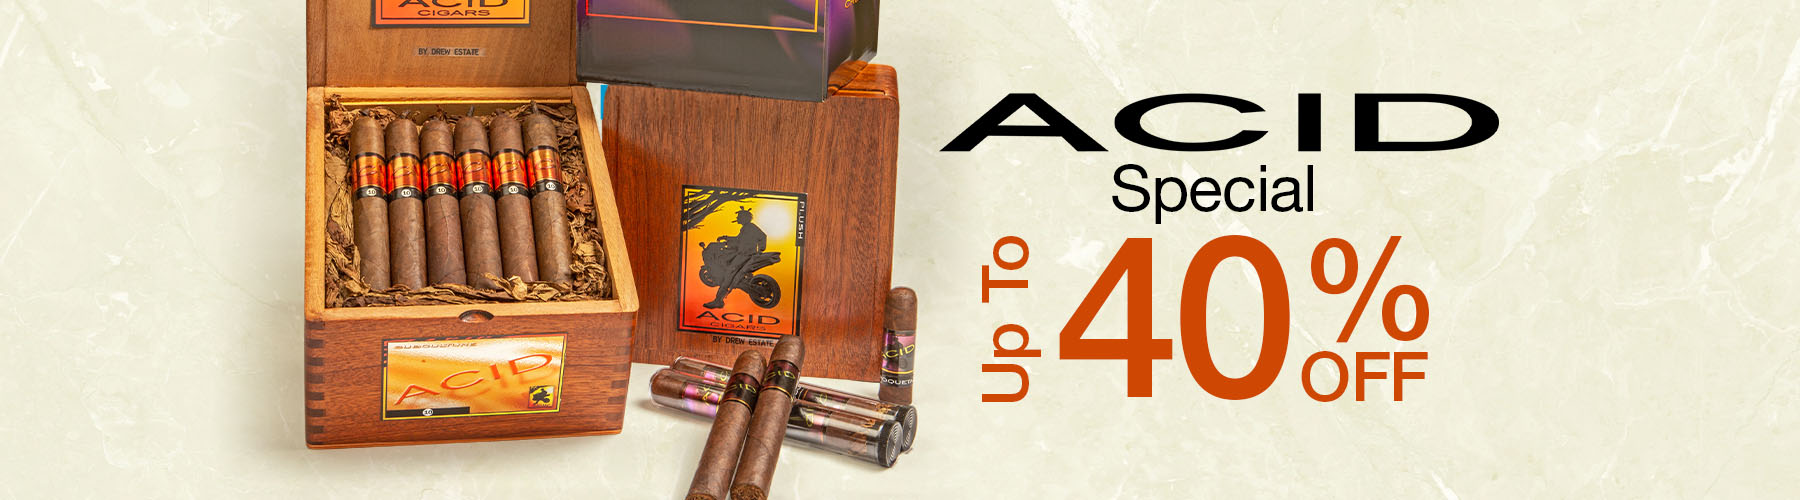 ACID Special Up to 40% off!